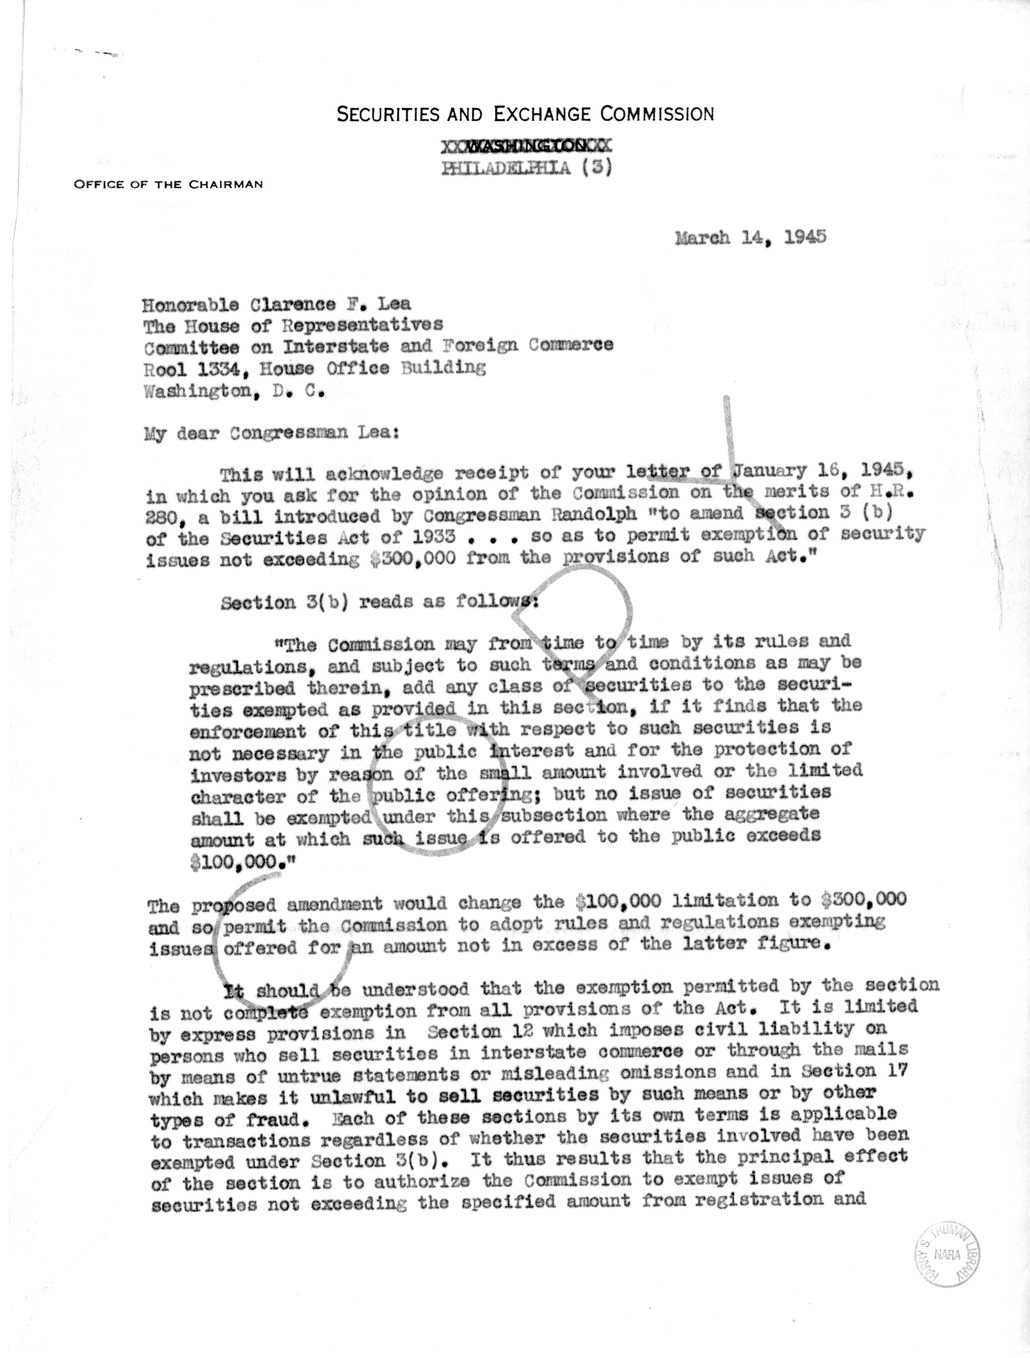 Memorandum from Harold D. Smith to M.C. Latta, S. 62, To Amend Sections 3(b) of the Securities Act of 1933, as Amended, with Attachments